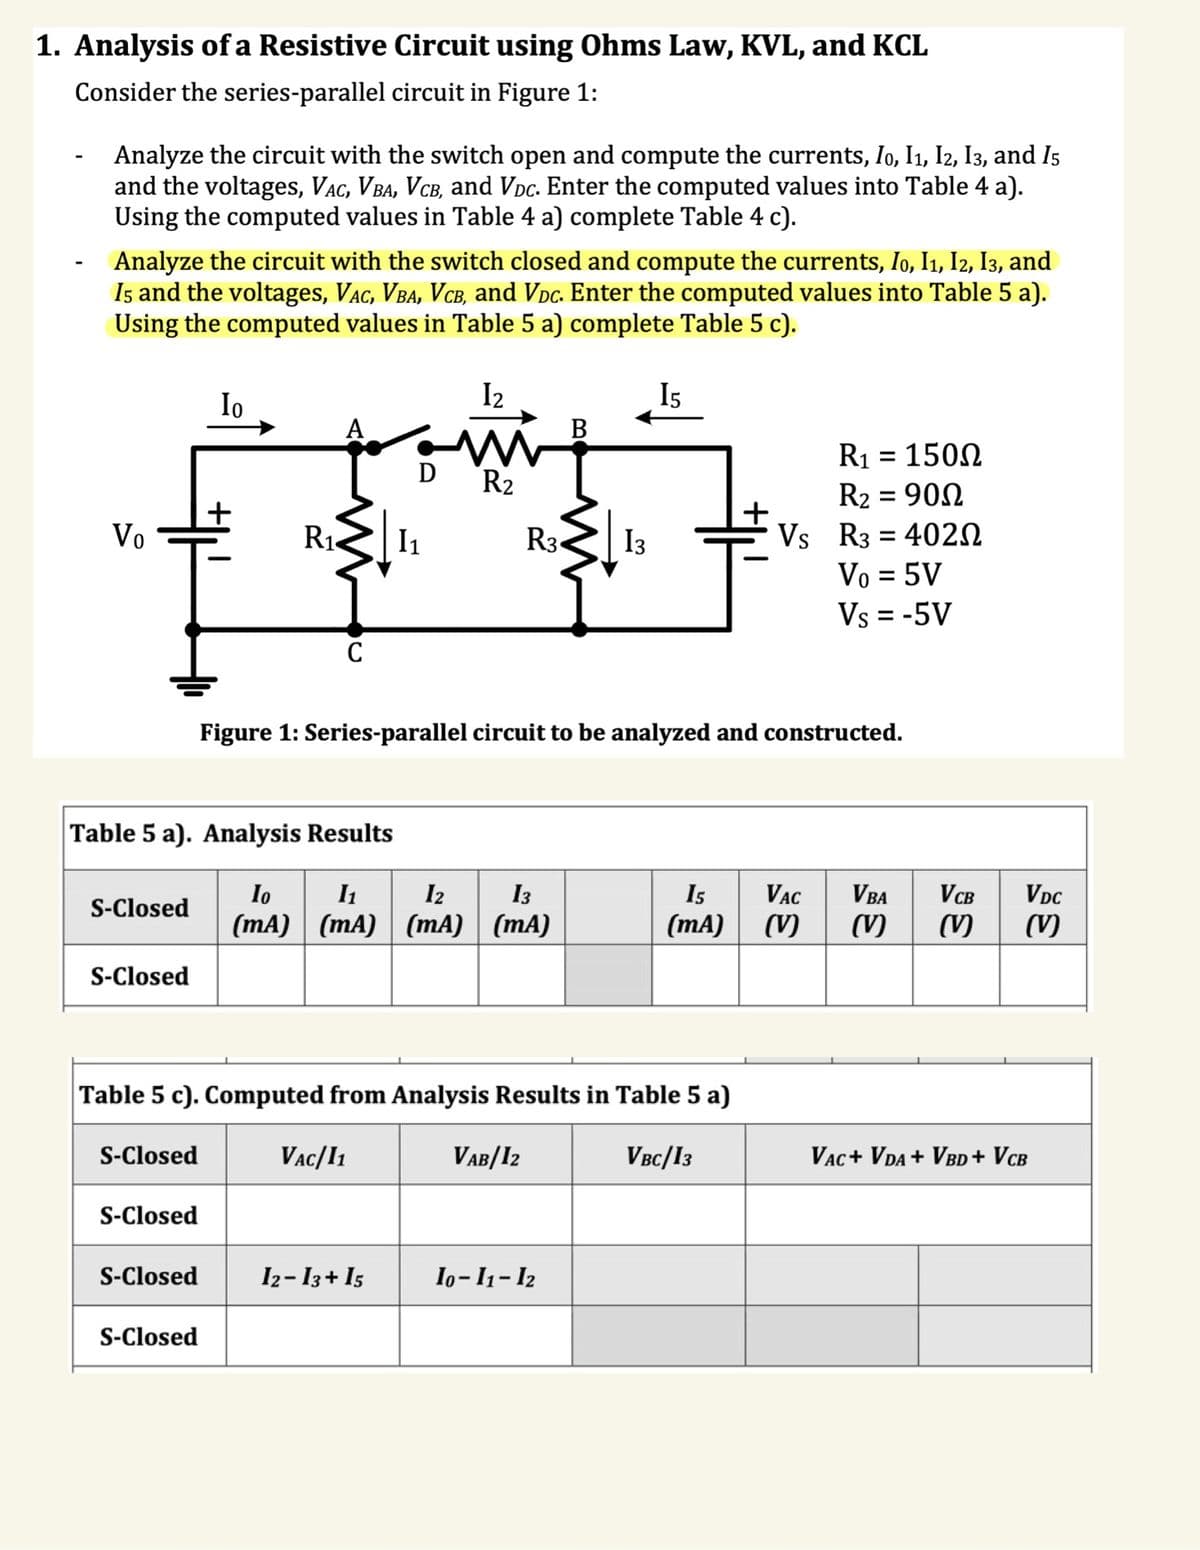 1. Analysis of a Resistive Circuit using Ohms Law, KVL, and KCL
Consider the series-parallel circuit in Figure 1:
-
Analyze the circuit with the switch open and compute the currents, I0, I1, I2, I3, and I5
and the voltages, Vac, VBA, VCB, and Voc. Enter the computed values into Table 4 a).
Using the computed values in Table 4 a) complete Table 4 c).
Analyze the circuit with the switch closed and compute the currents, I0, I1, I2, I3, and
15 and the voltages, Vac, Vba, Vcâ, and Vòc. Enter the computed values into Table 5 a).
Using the computed values in Table 5 a) complete Table 5 c).
Vo
S-Closed
S-Closed
S-Closed
Table 5 a). Analysis Results
S-Closed
Io
S-Closed
+
S-Closed
R₁
C
D
1₁
12
ww
R₂
VAC/11
R3
Io I₁ 12 13
(mA) (mA) (mA) (mA)
Table 5 c). Computed from Analysis Results in Table 5 a)
VBC/13
VAB/12
B
Figure 1: Series-parallel circuit to be analyzed and constructed.
13
12−13+15 | 10-11-12
Is
+
R1 = 150Ω
R₂ = 900
Vs R3 4020
=
Vo = 5V
Vs = -5V
15 VAC VBA
(mA) (V)
VDC
VCB
(V) (V) (V)
VAC+ VDA + VBD + VCB